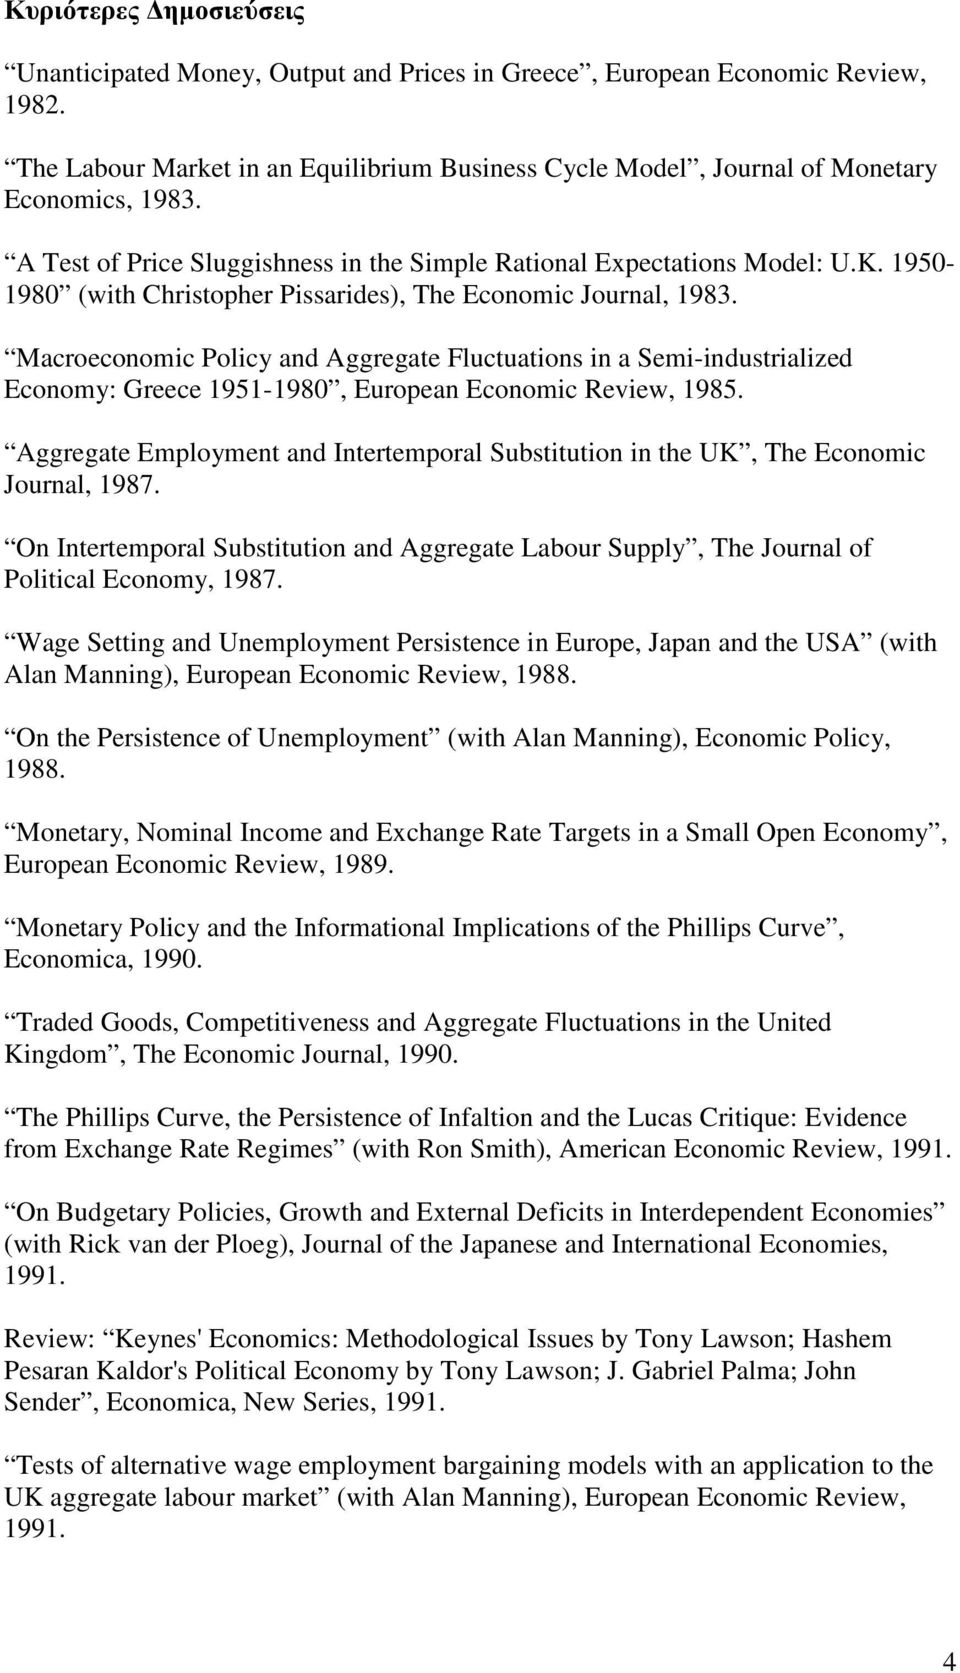 Macroeconomic Policy and Aggregate Fluctuations in a Semi-industrialized Economy: Greece 1951-1980, European Economic Review, 1985.